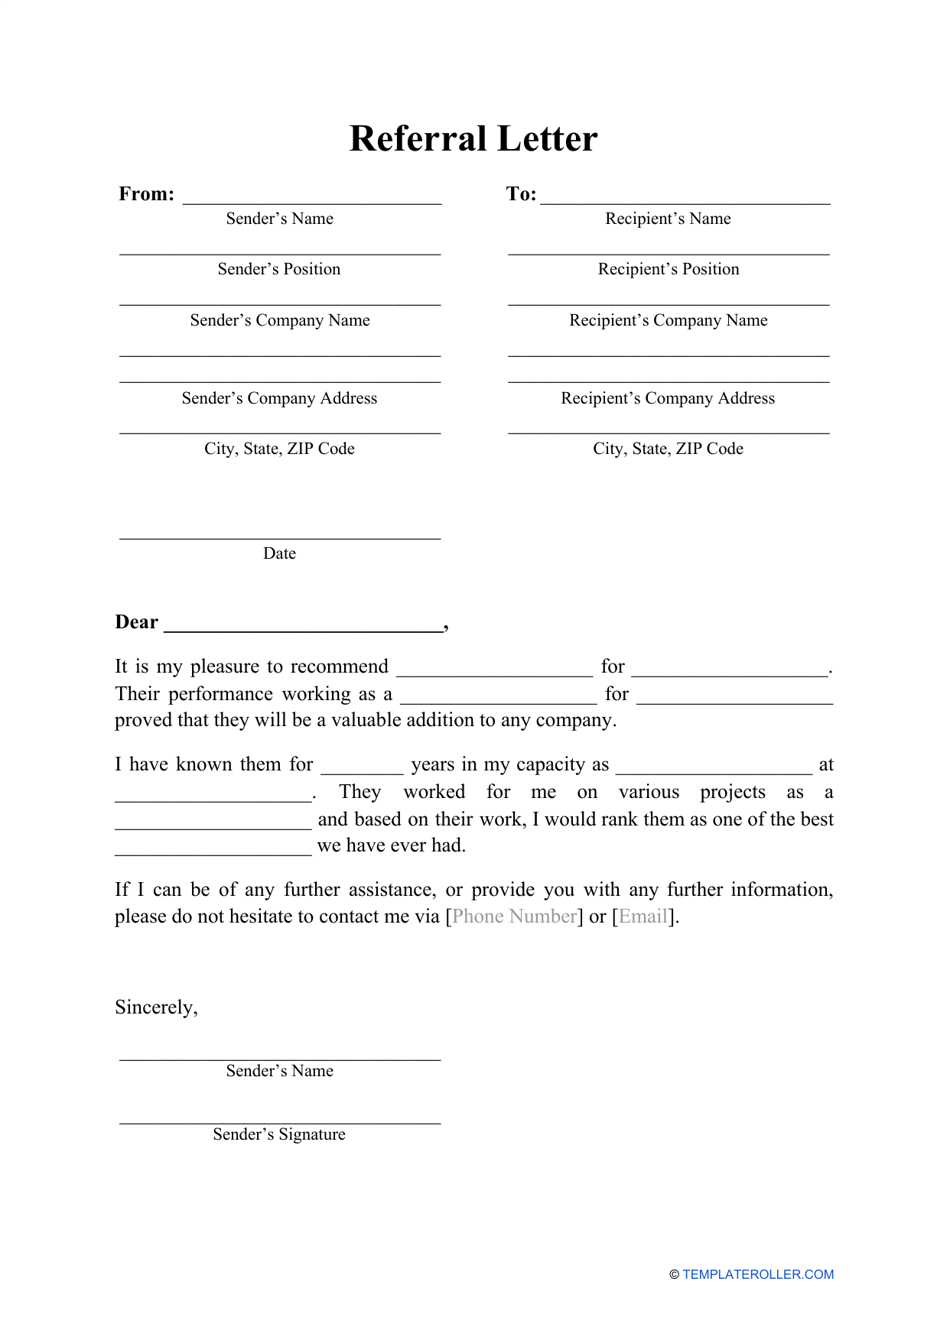 Referral Letter Template Download Printable PDF Templateroller